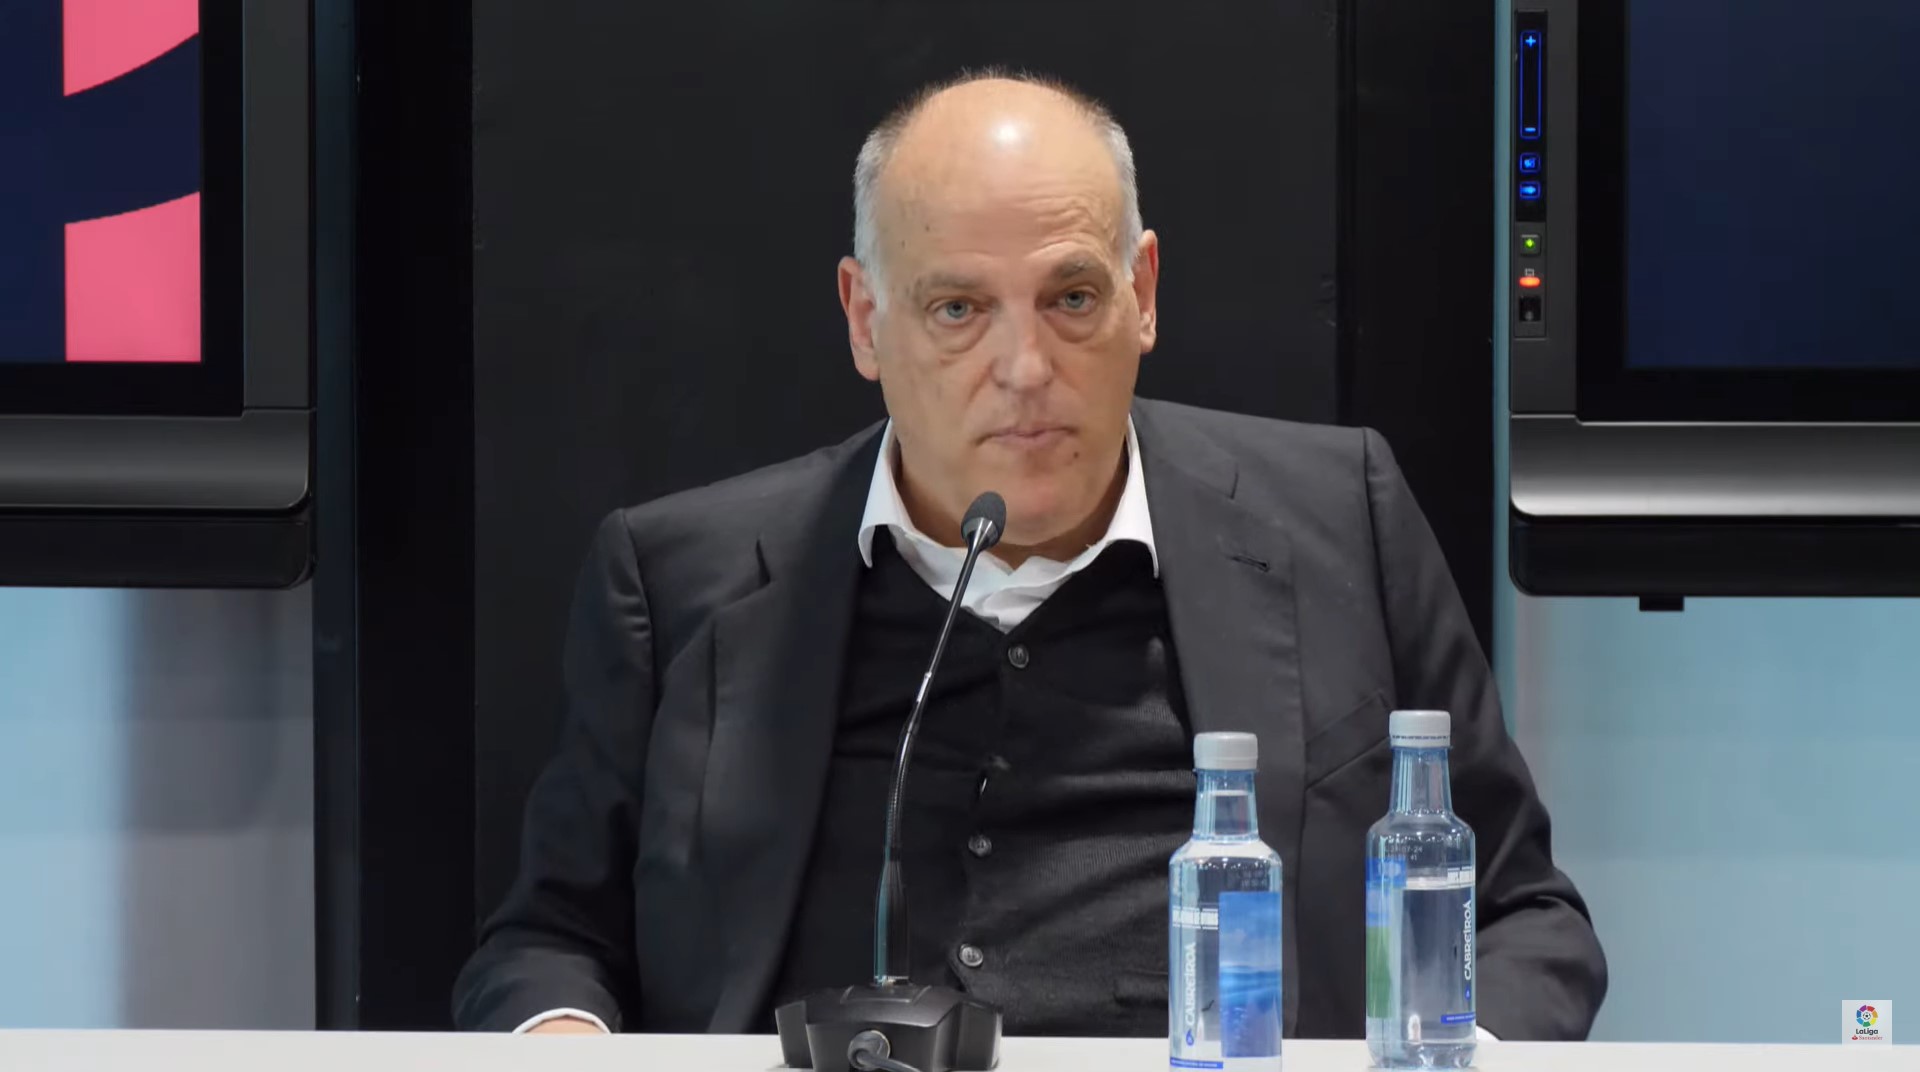 “He’s a pathological liar” – Javier Tebas hits out at Luis Rubiales amid corruption investigation